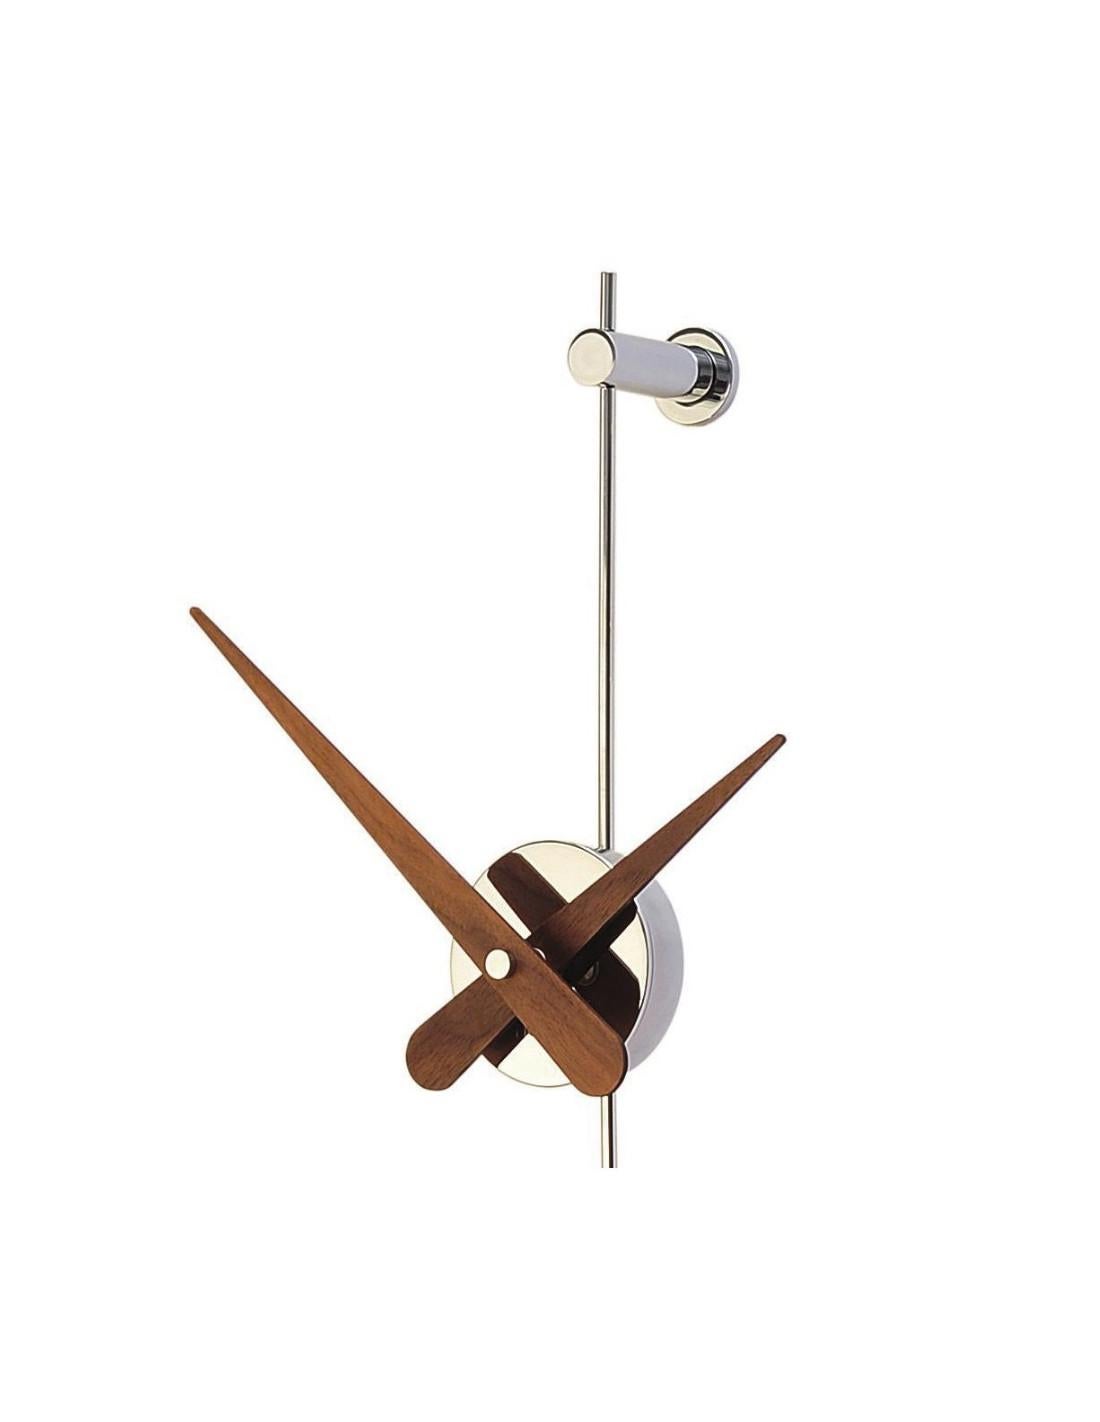 The Punto Y Coma N wall clock is large and beautifully designed in the style of modern minimalism its ideal for interior decoration.
Each clock is a unique handmade piece.
Punto Y Coma N clock: Chrome steel and walnut needles.
California